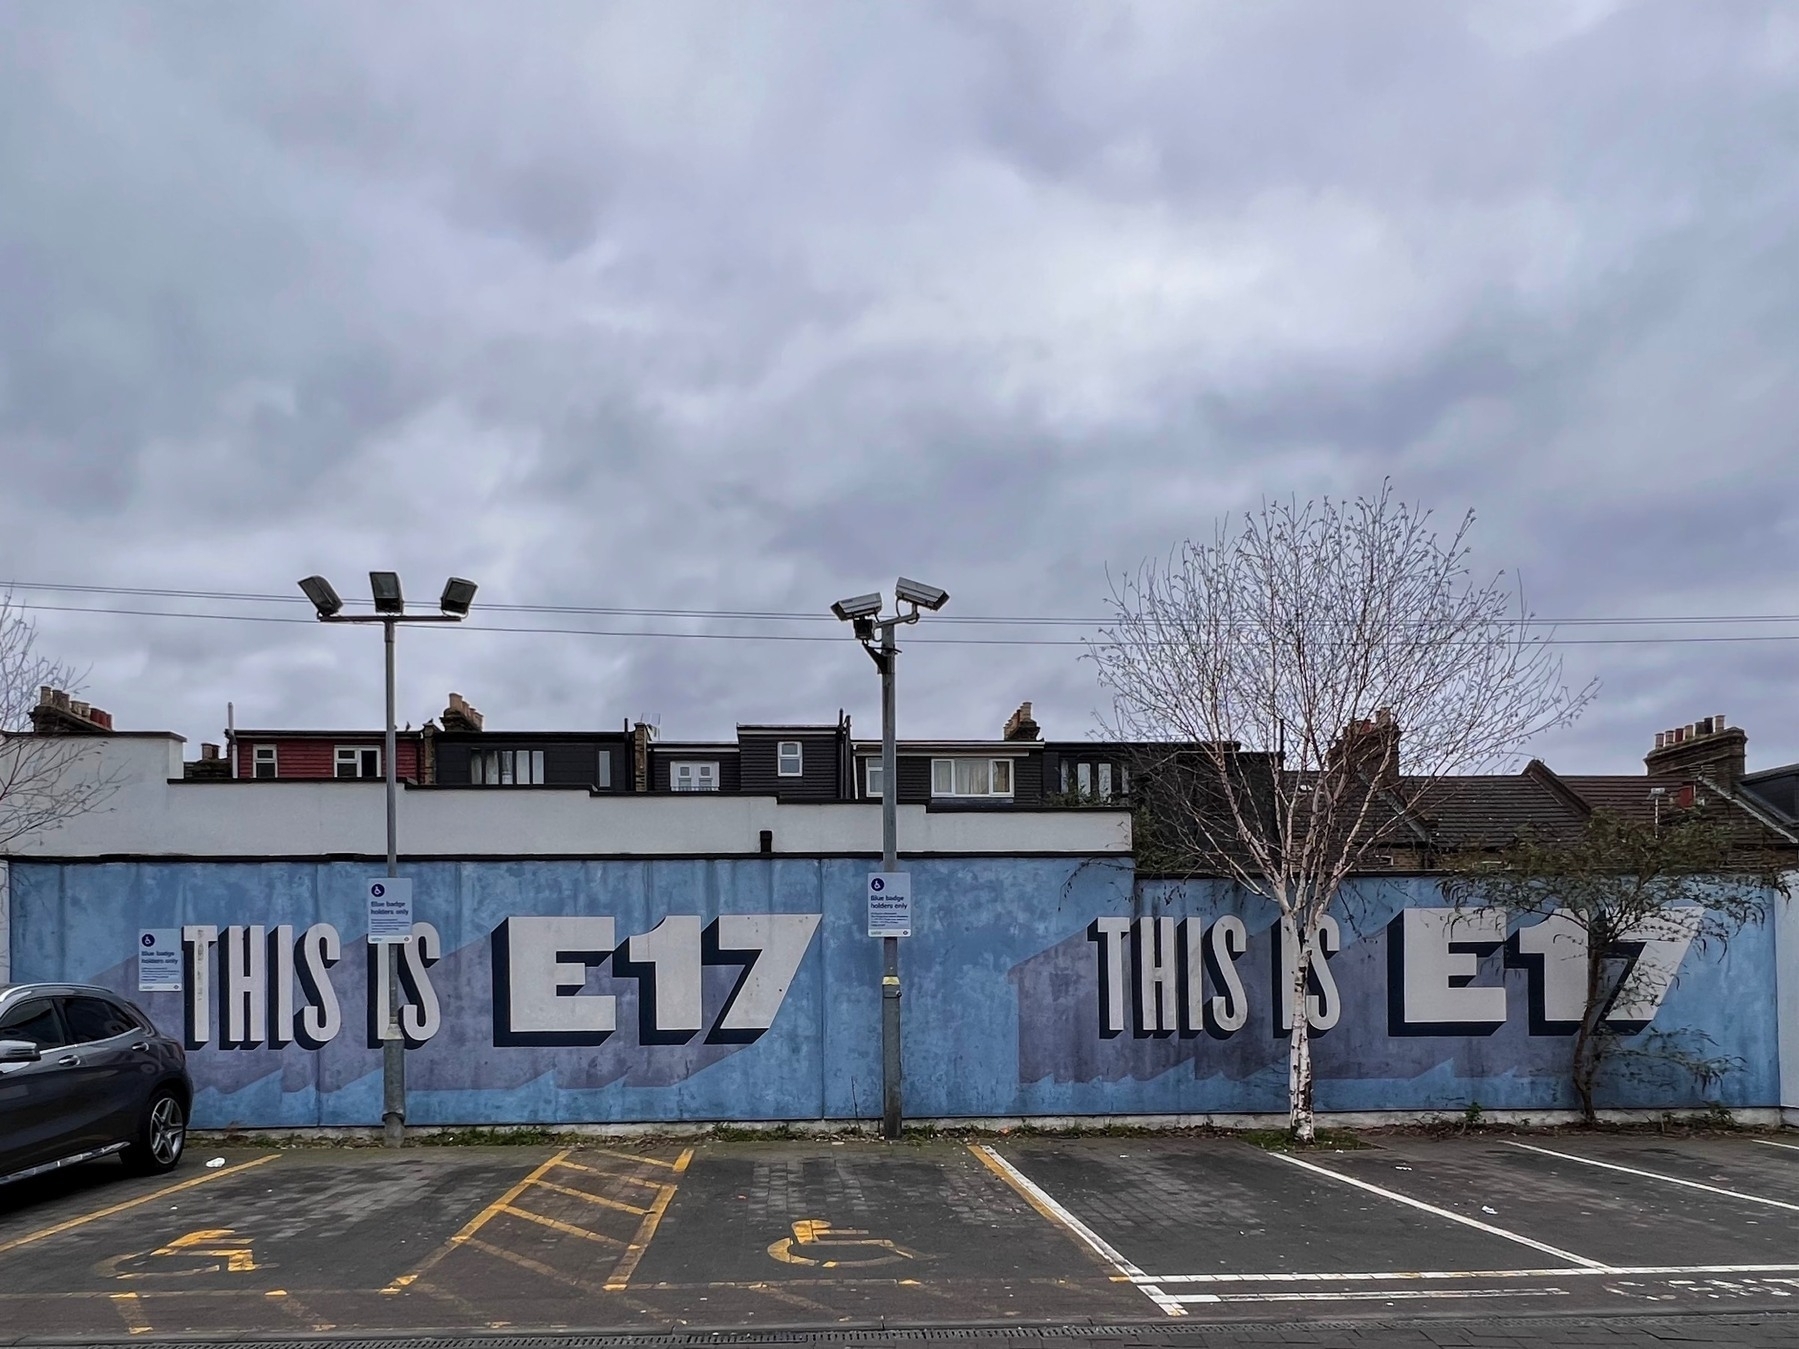 The This is E17 mural opposite the entrance to Walthamstow Central station